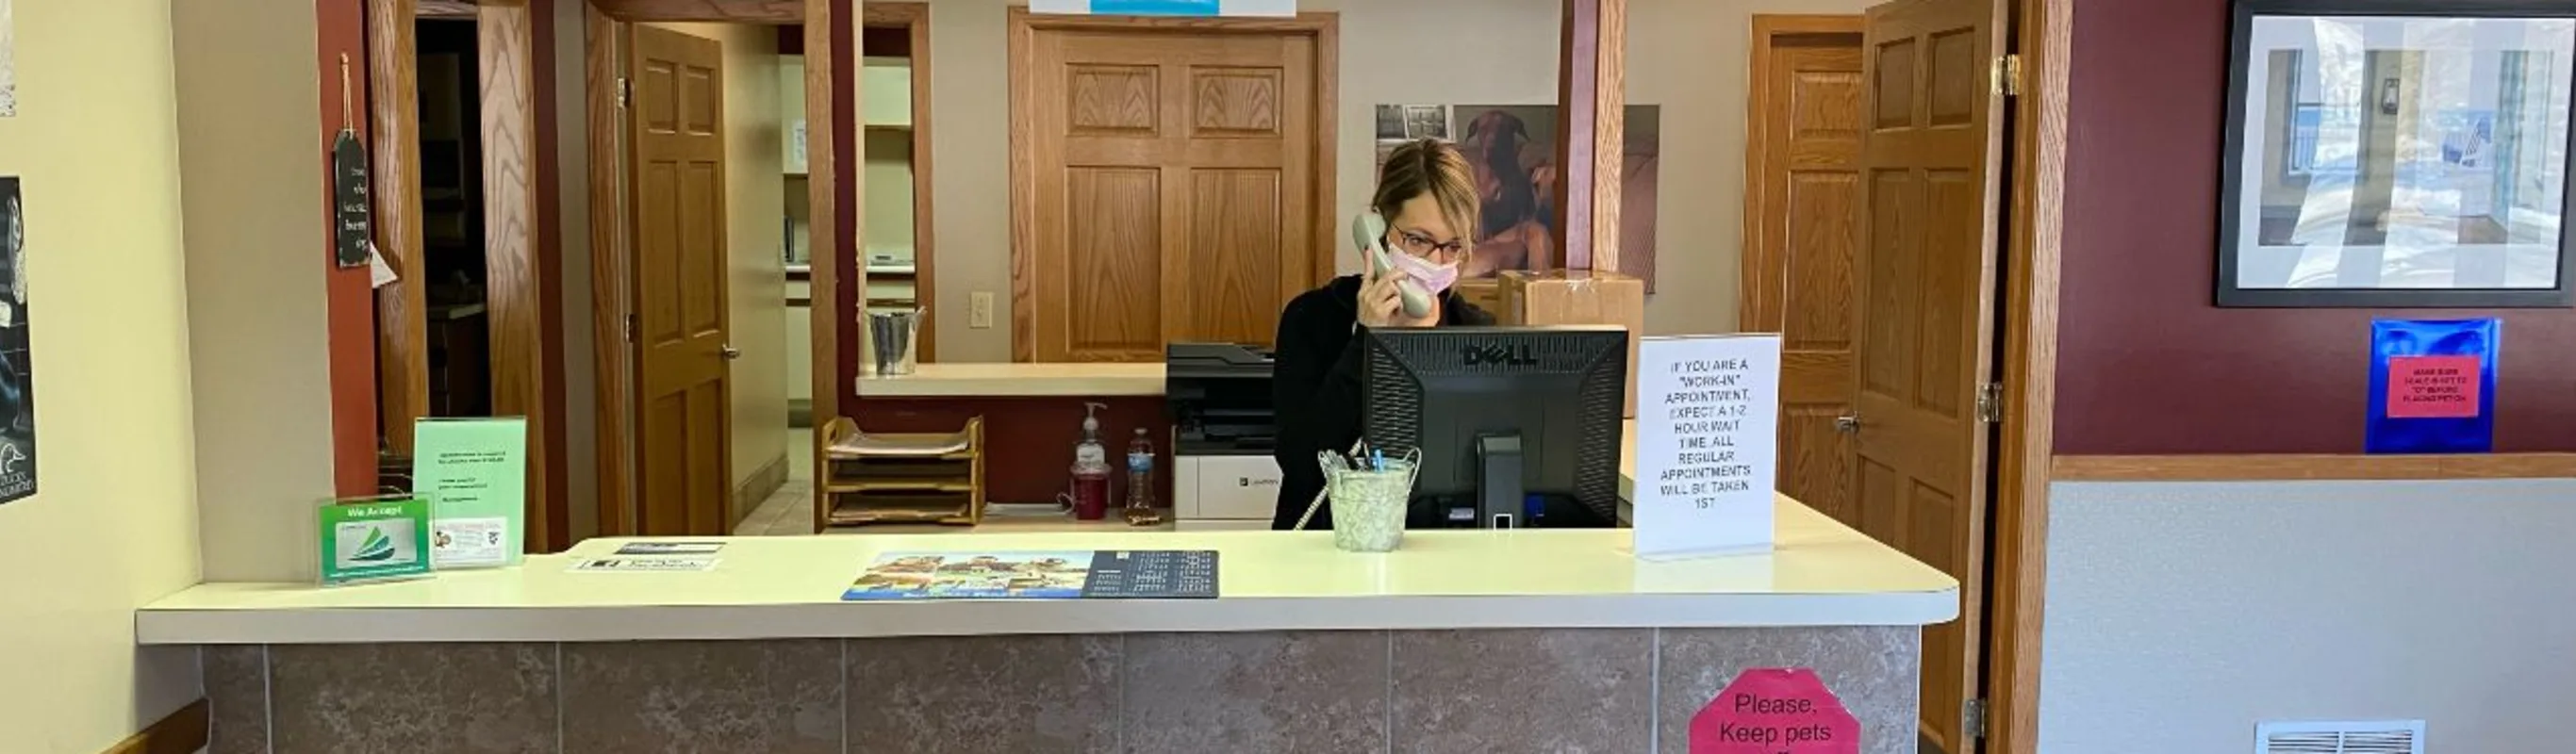 Reception staff in lobby of State Street Animal Clinic.